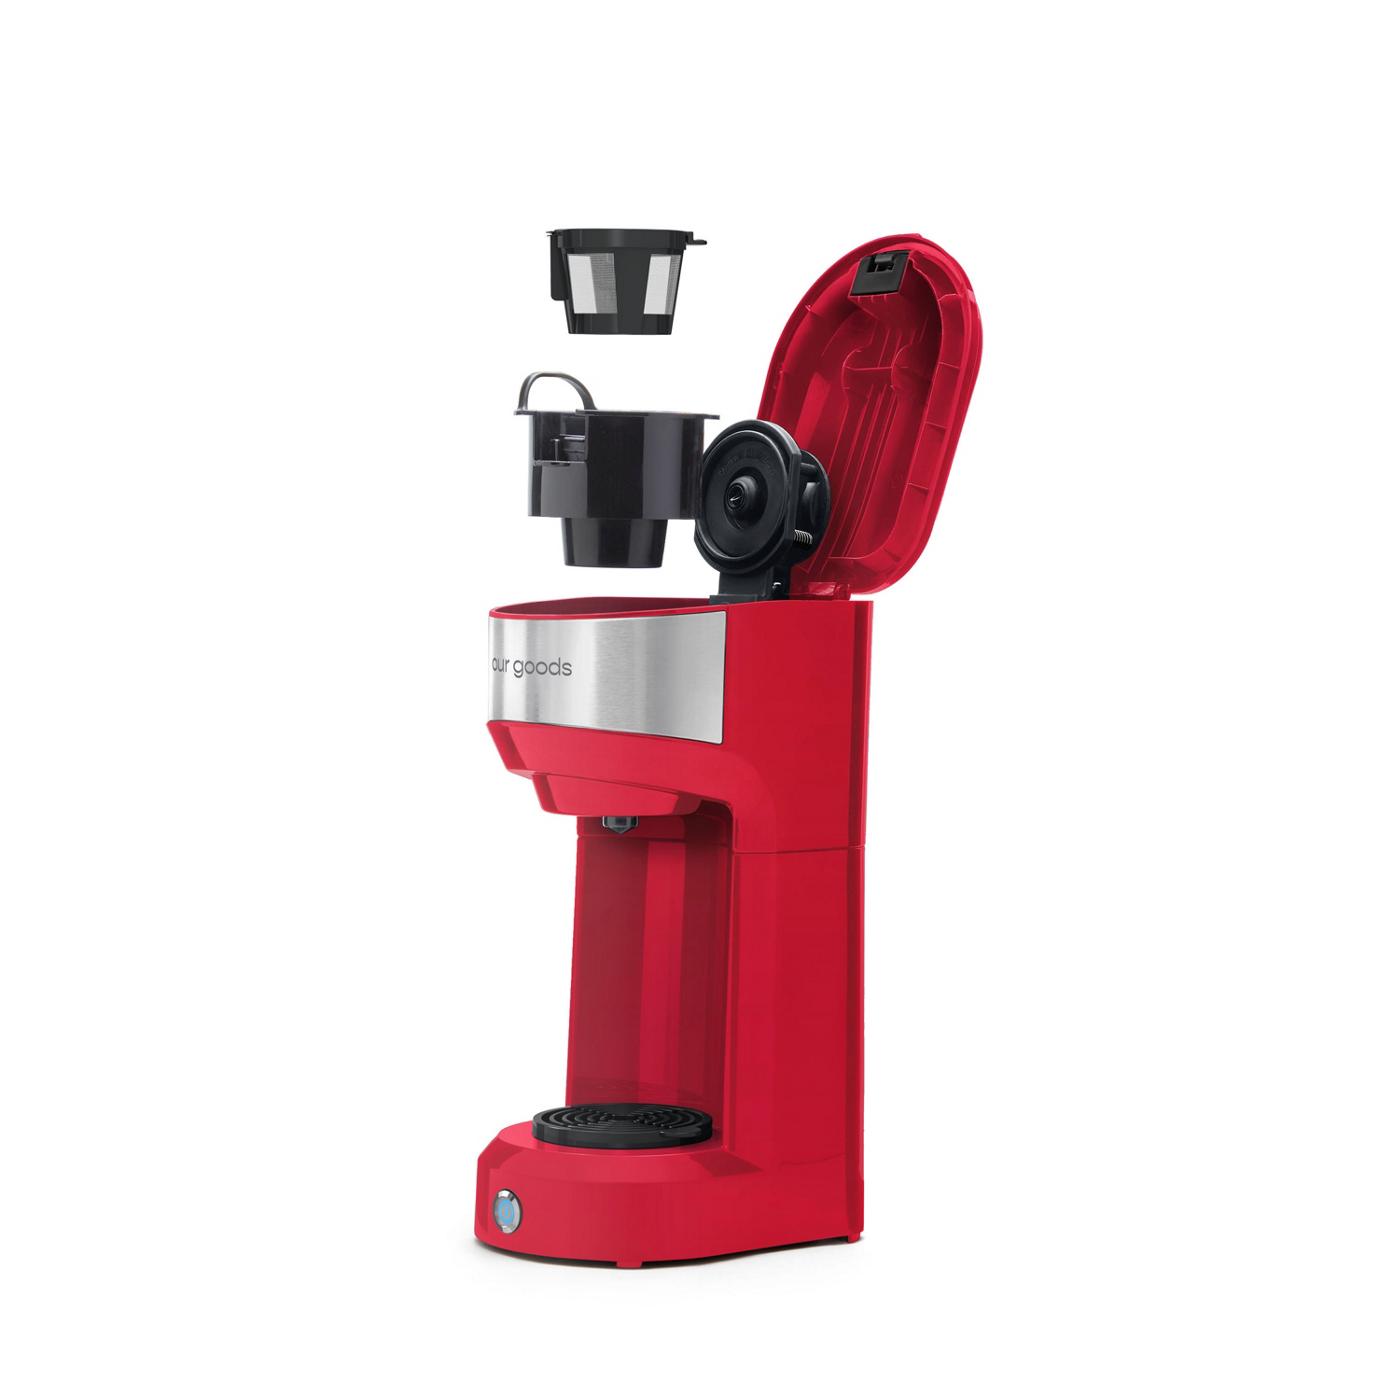 our goods Single Serve Coffee Maker - Scarlet Red; image 2 of 3